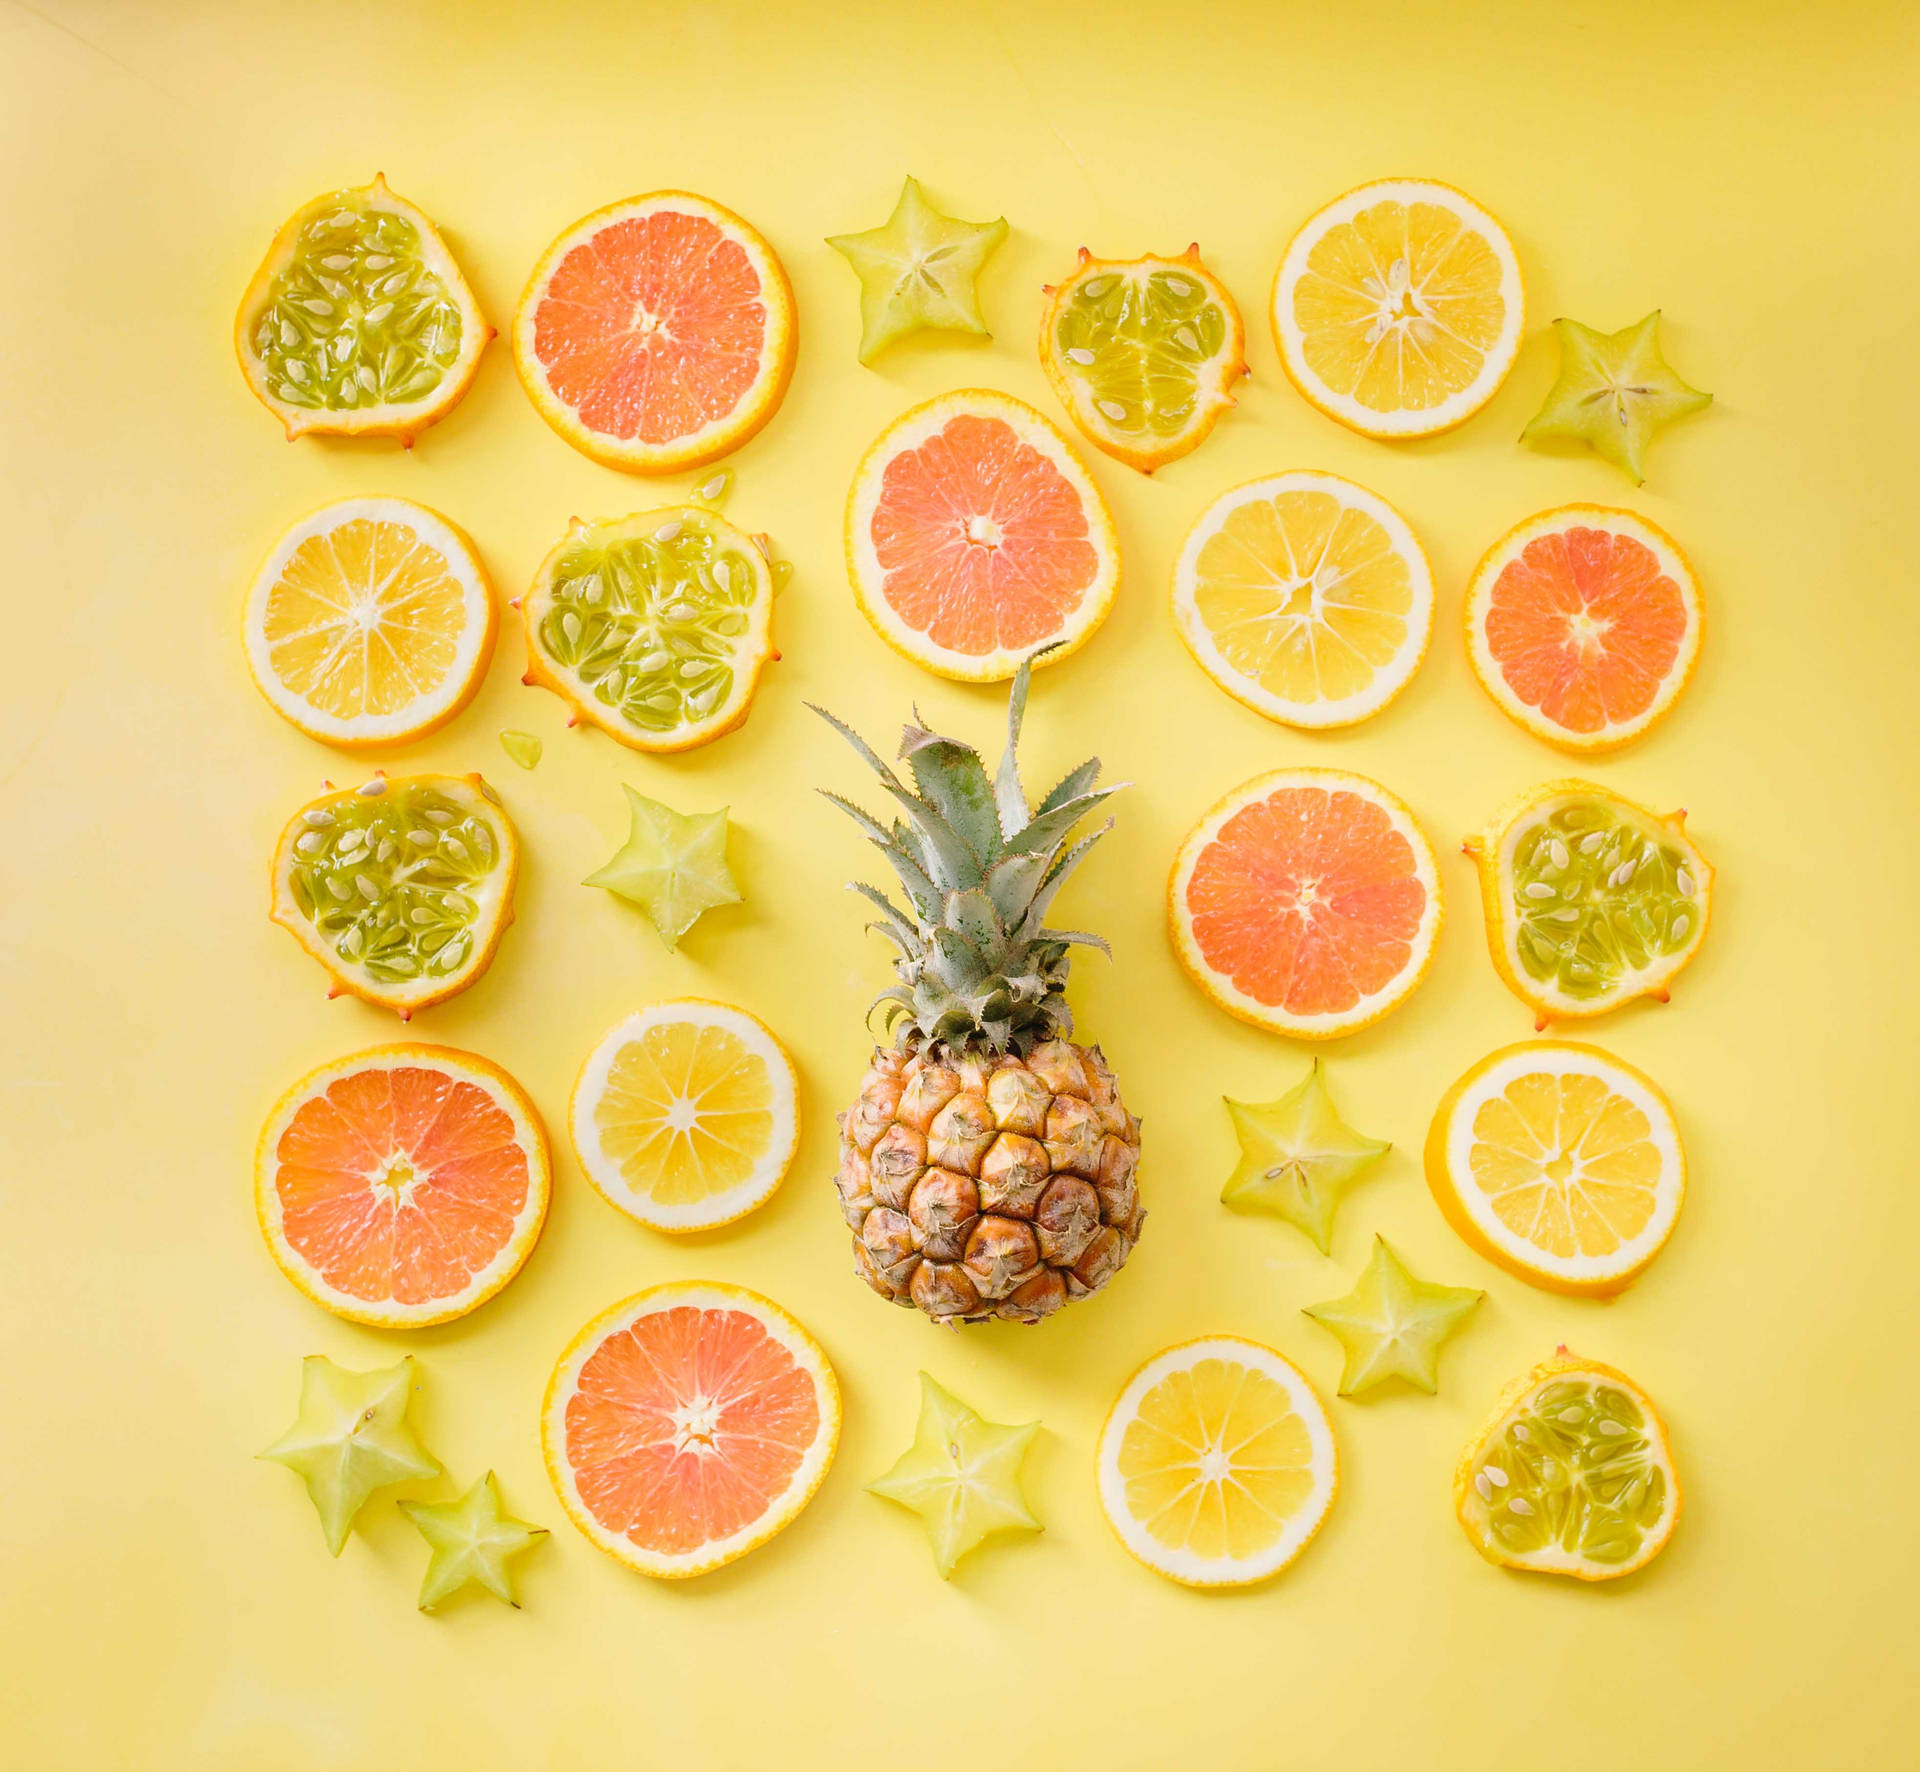 Sweet and Tangy Pineapple and Citrus Treat Wallpaper